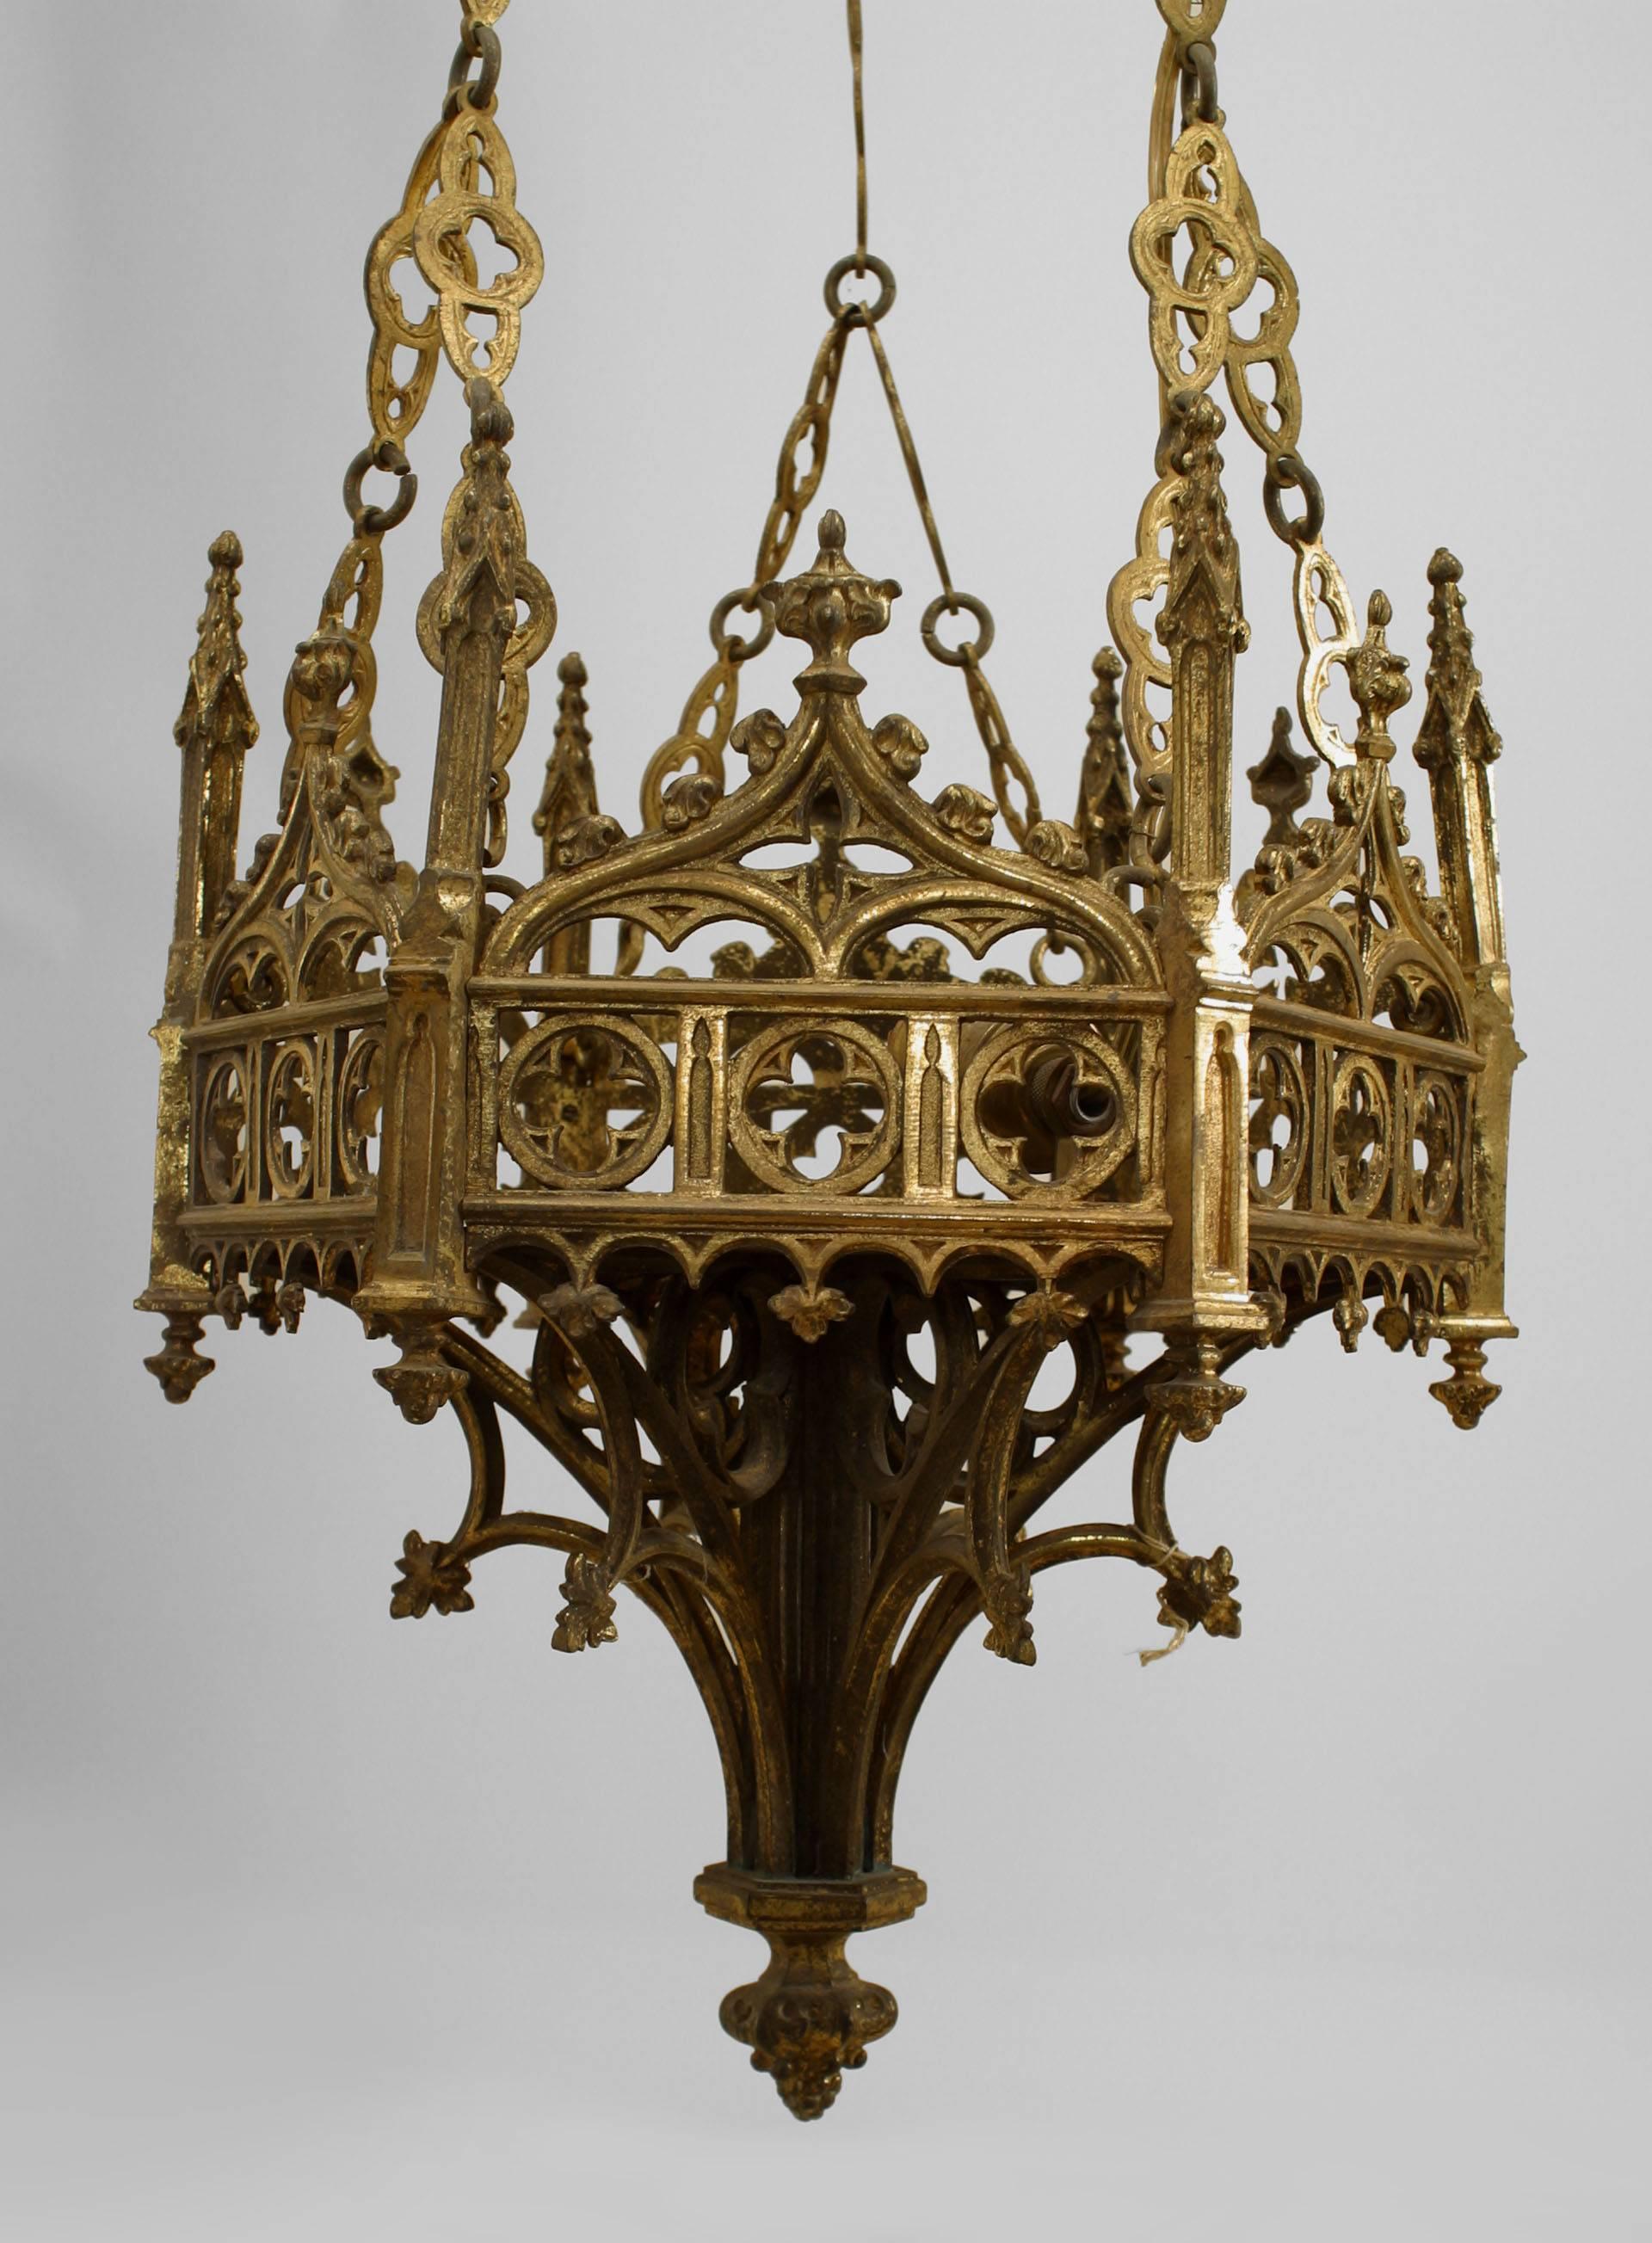 2 English Gothic Revival-style (19th Century) bronze dore 6 sided filigree sanctuary fixtures. (PRICED EACH)
